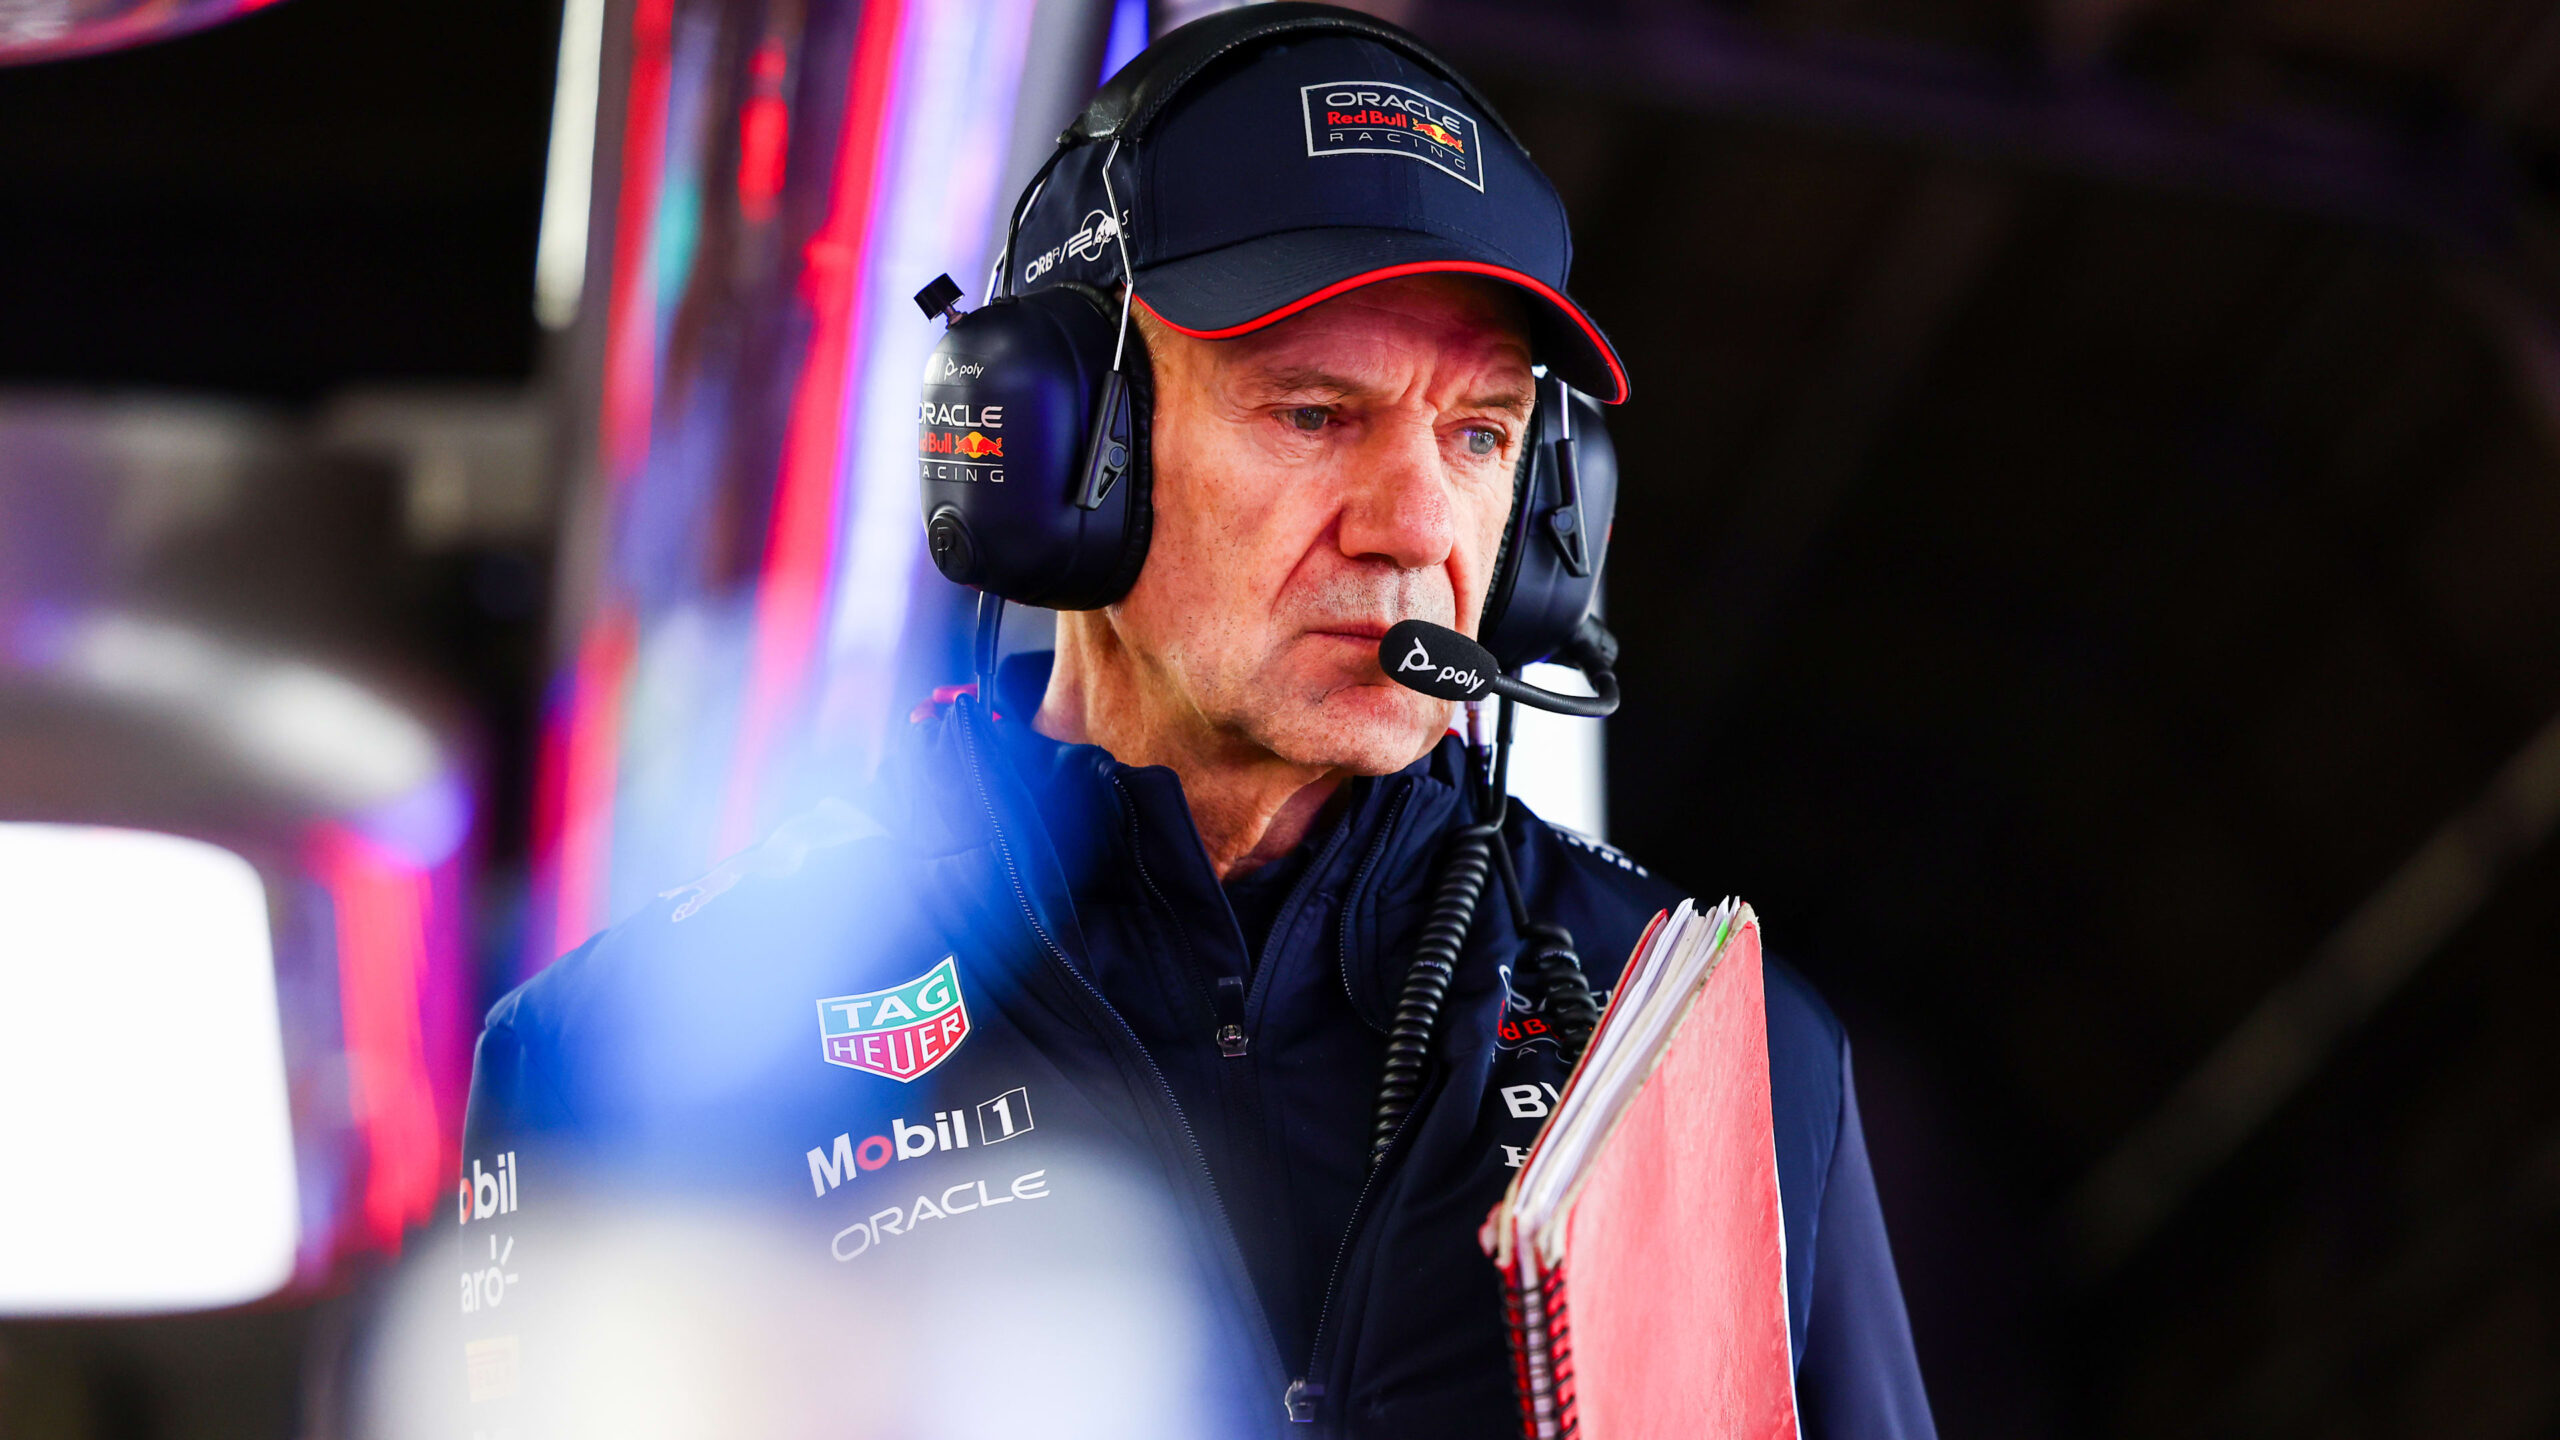 Red Bull confirm legendary F1 designer Adrian Newey is to leave the team